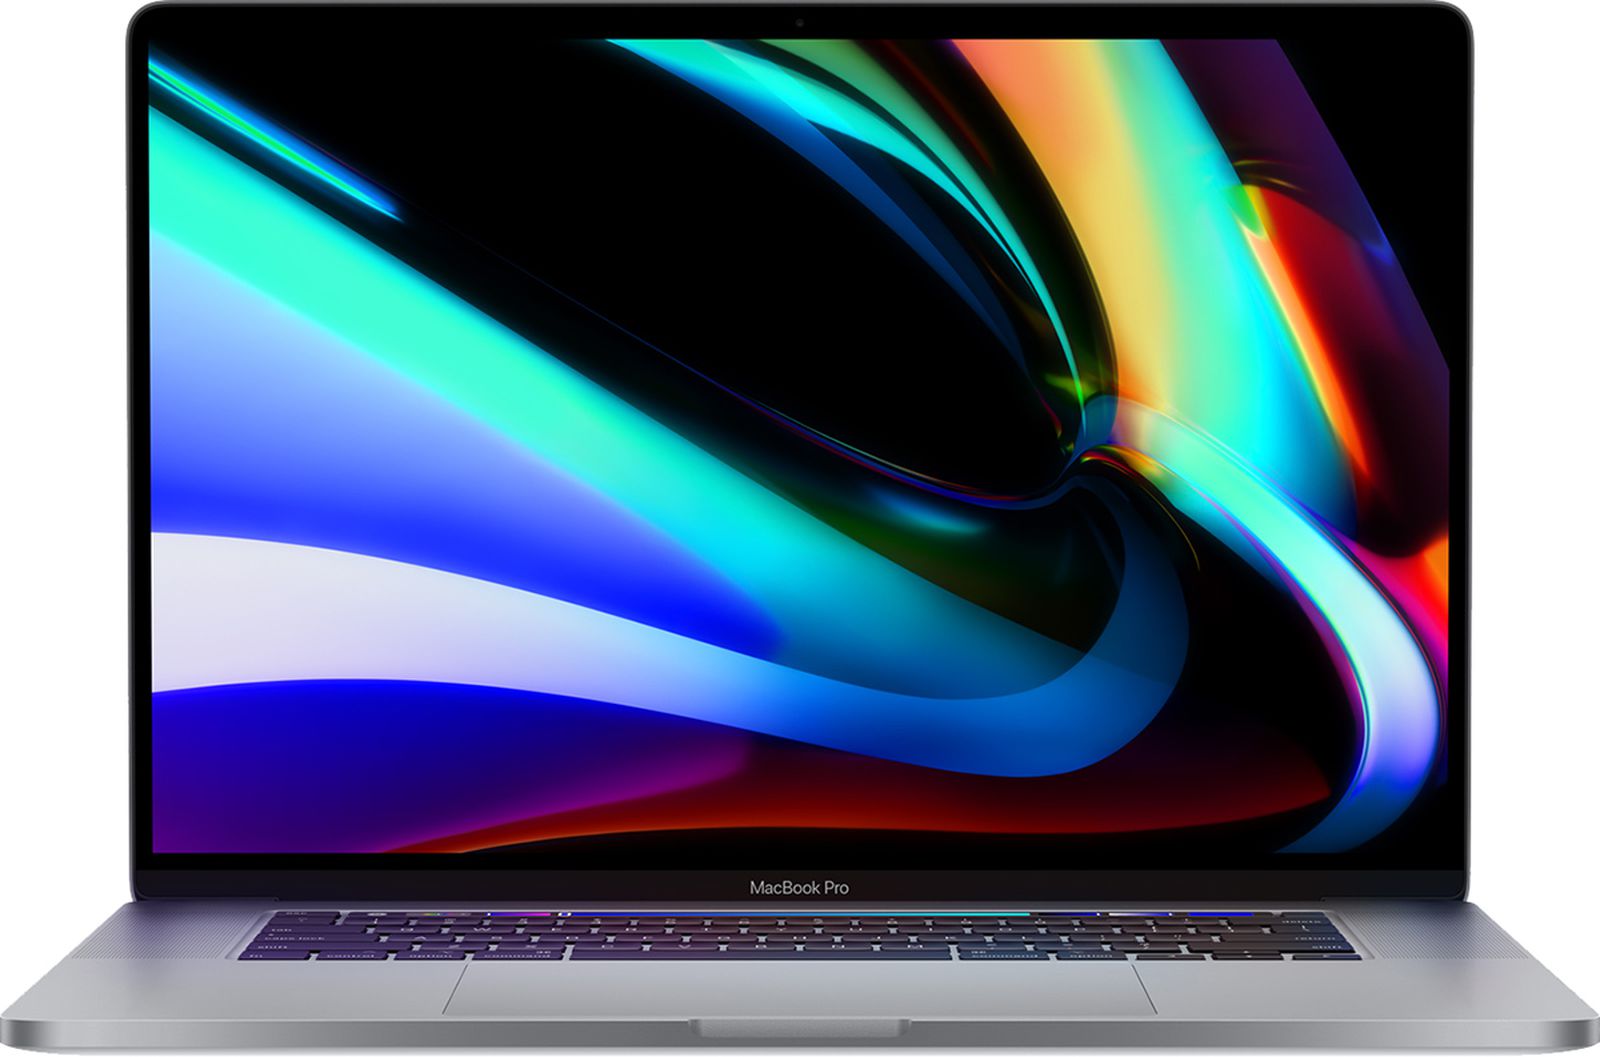 Kuo: new MacBook Pro models with flat edge design, MagSafe, touch bar and more ports